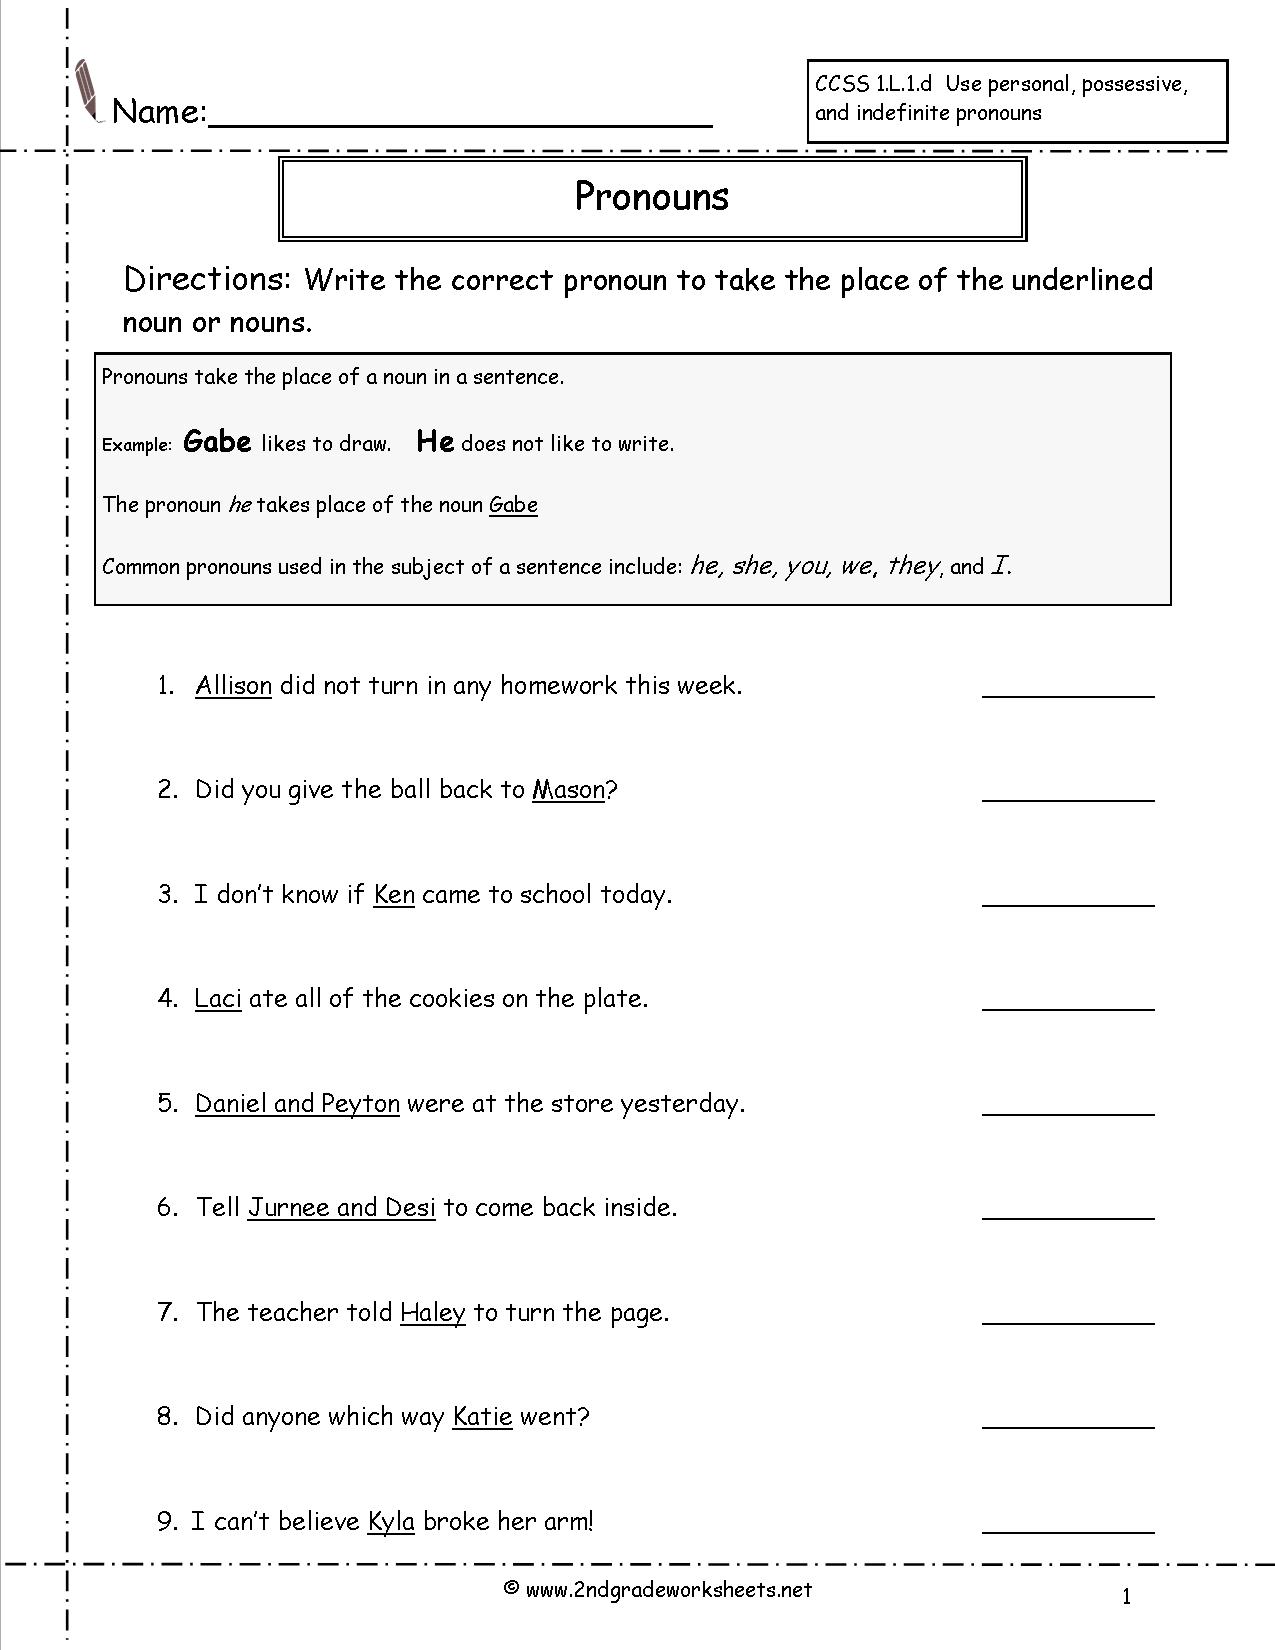 14 Images of Reflexive Pronouns Worksheet With Questions